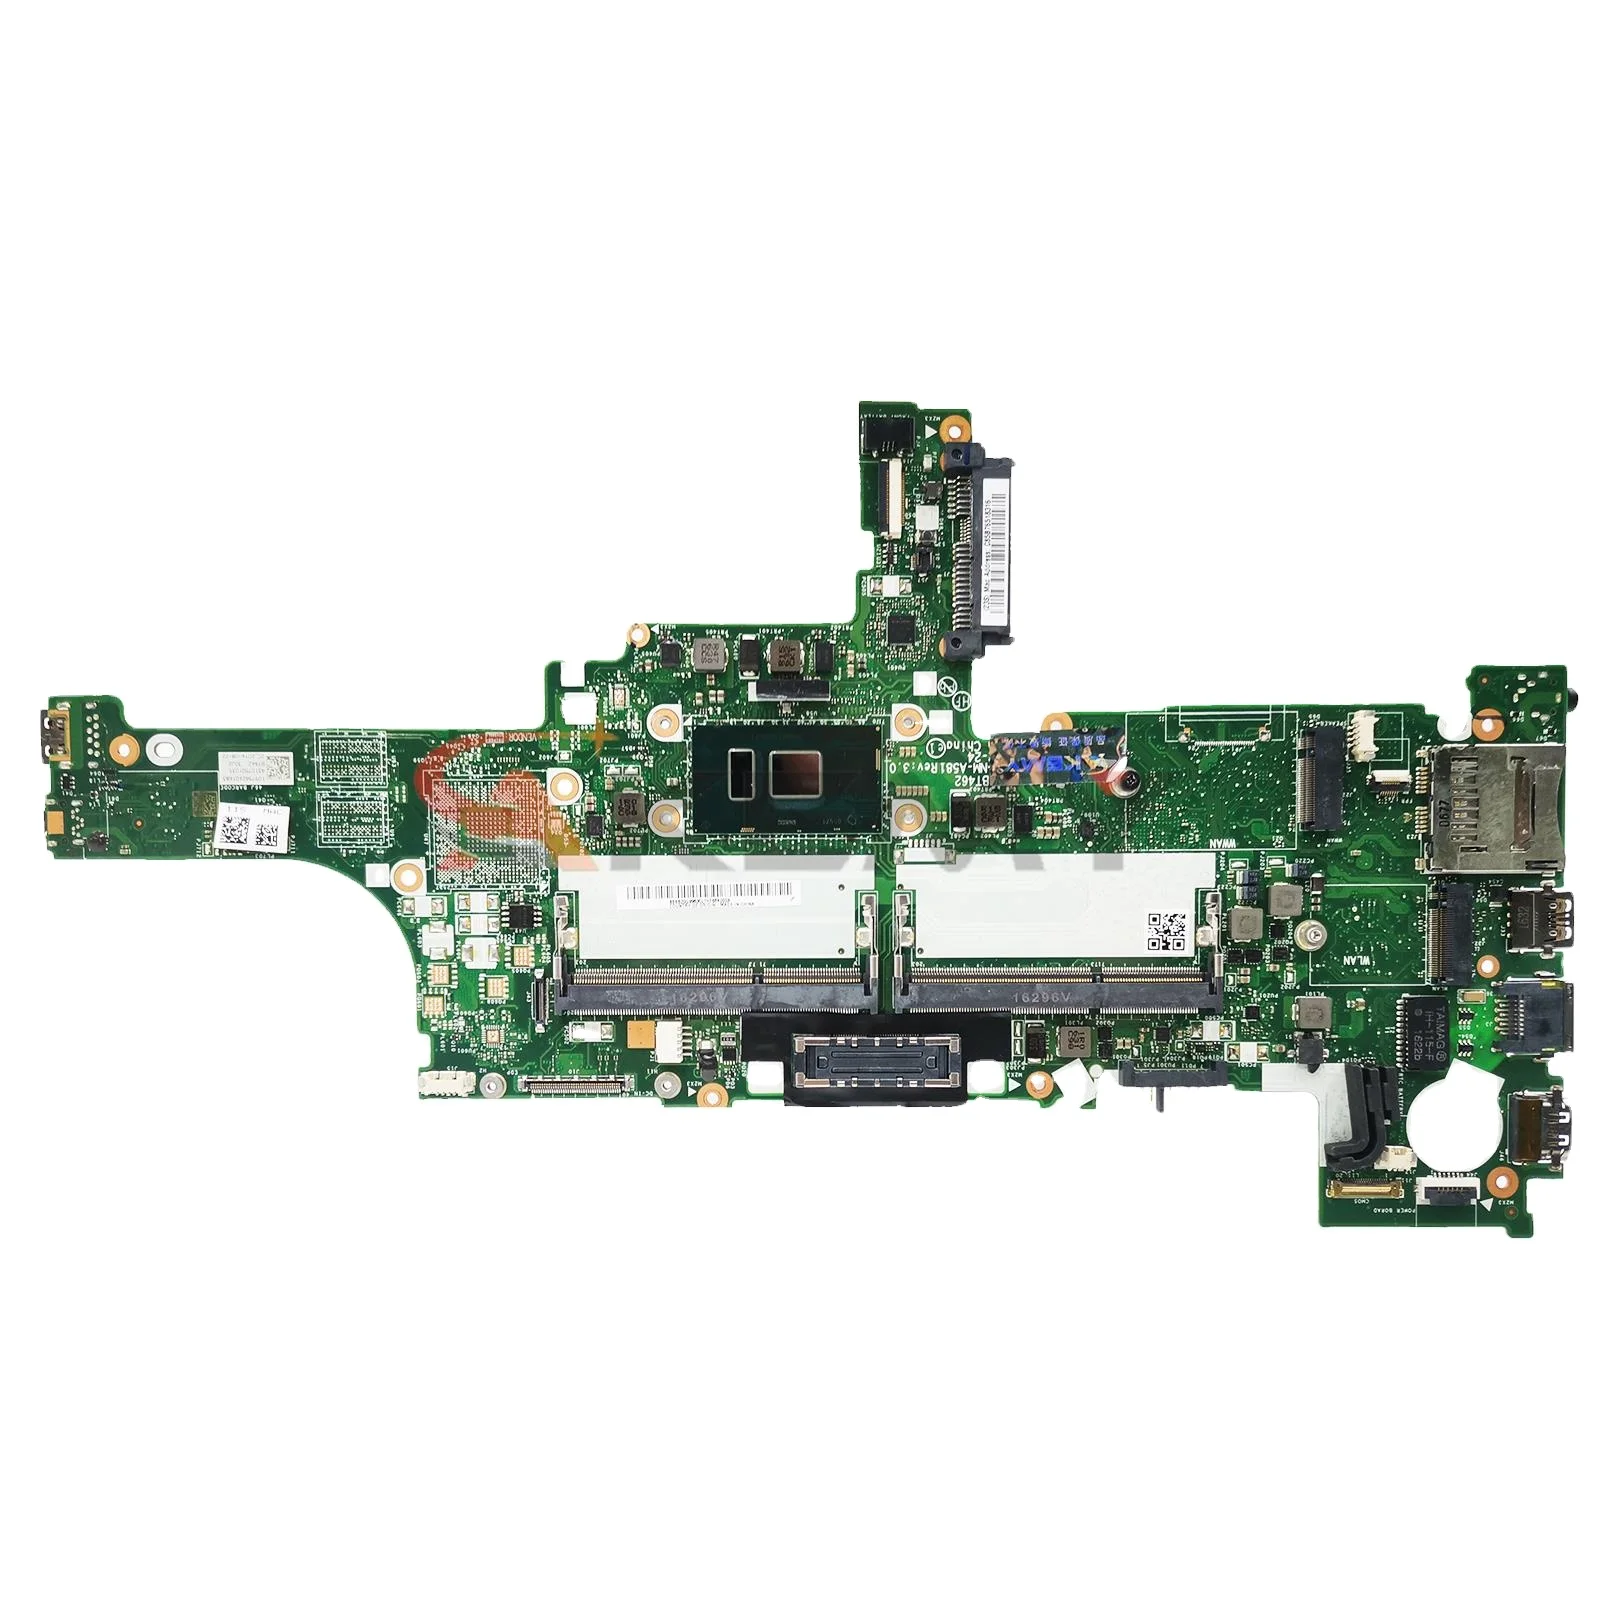 

01AW344 Laptop motherboard For Lenovo Thinkpad T460 i5-6300U I7-6600U Notebook Mainboard NM-A581 DDR3